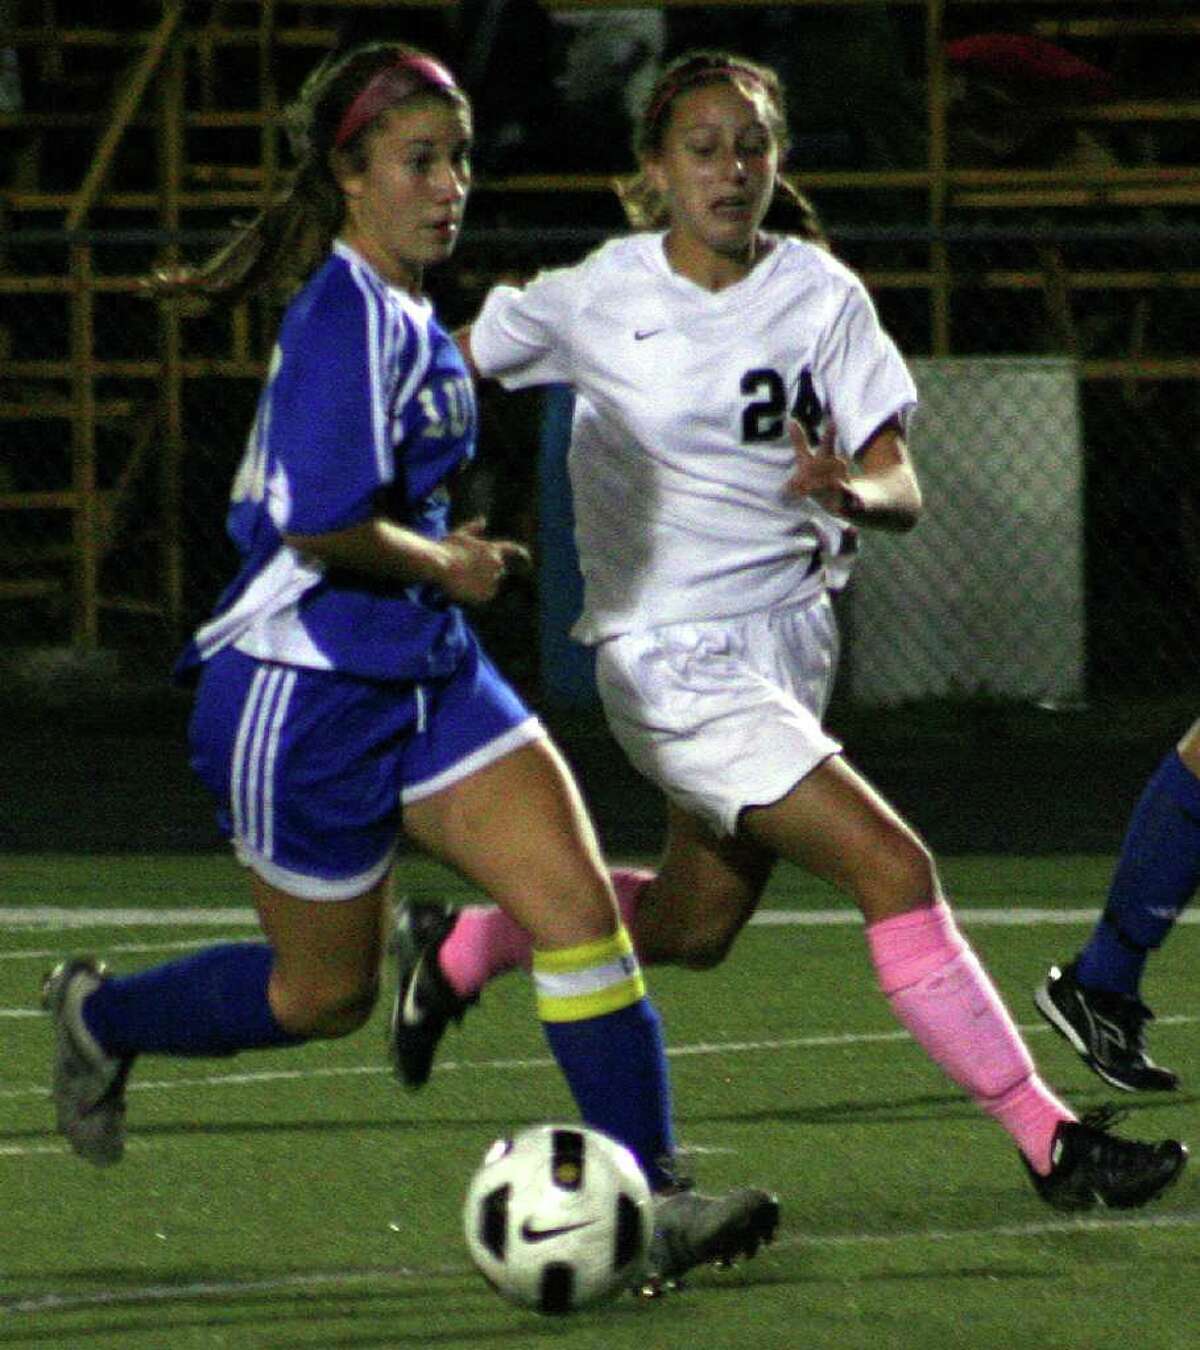 Fairfield Ludlowe's Mary Kamovitch dribbles the ball passed Melissa Rulotini during the Falcons' 0-0 tie with Trumbull on Monday in Trumbull.